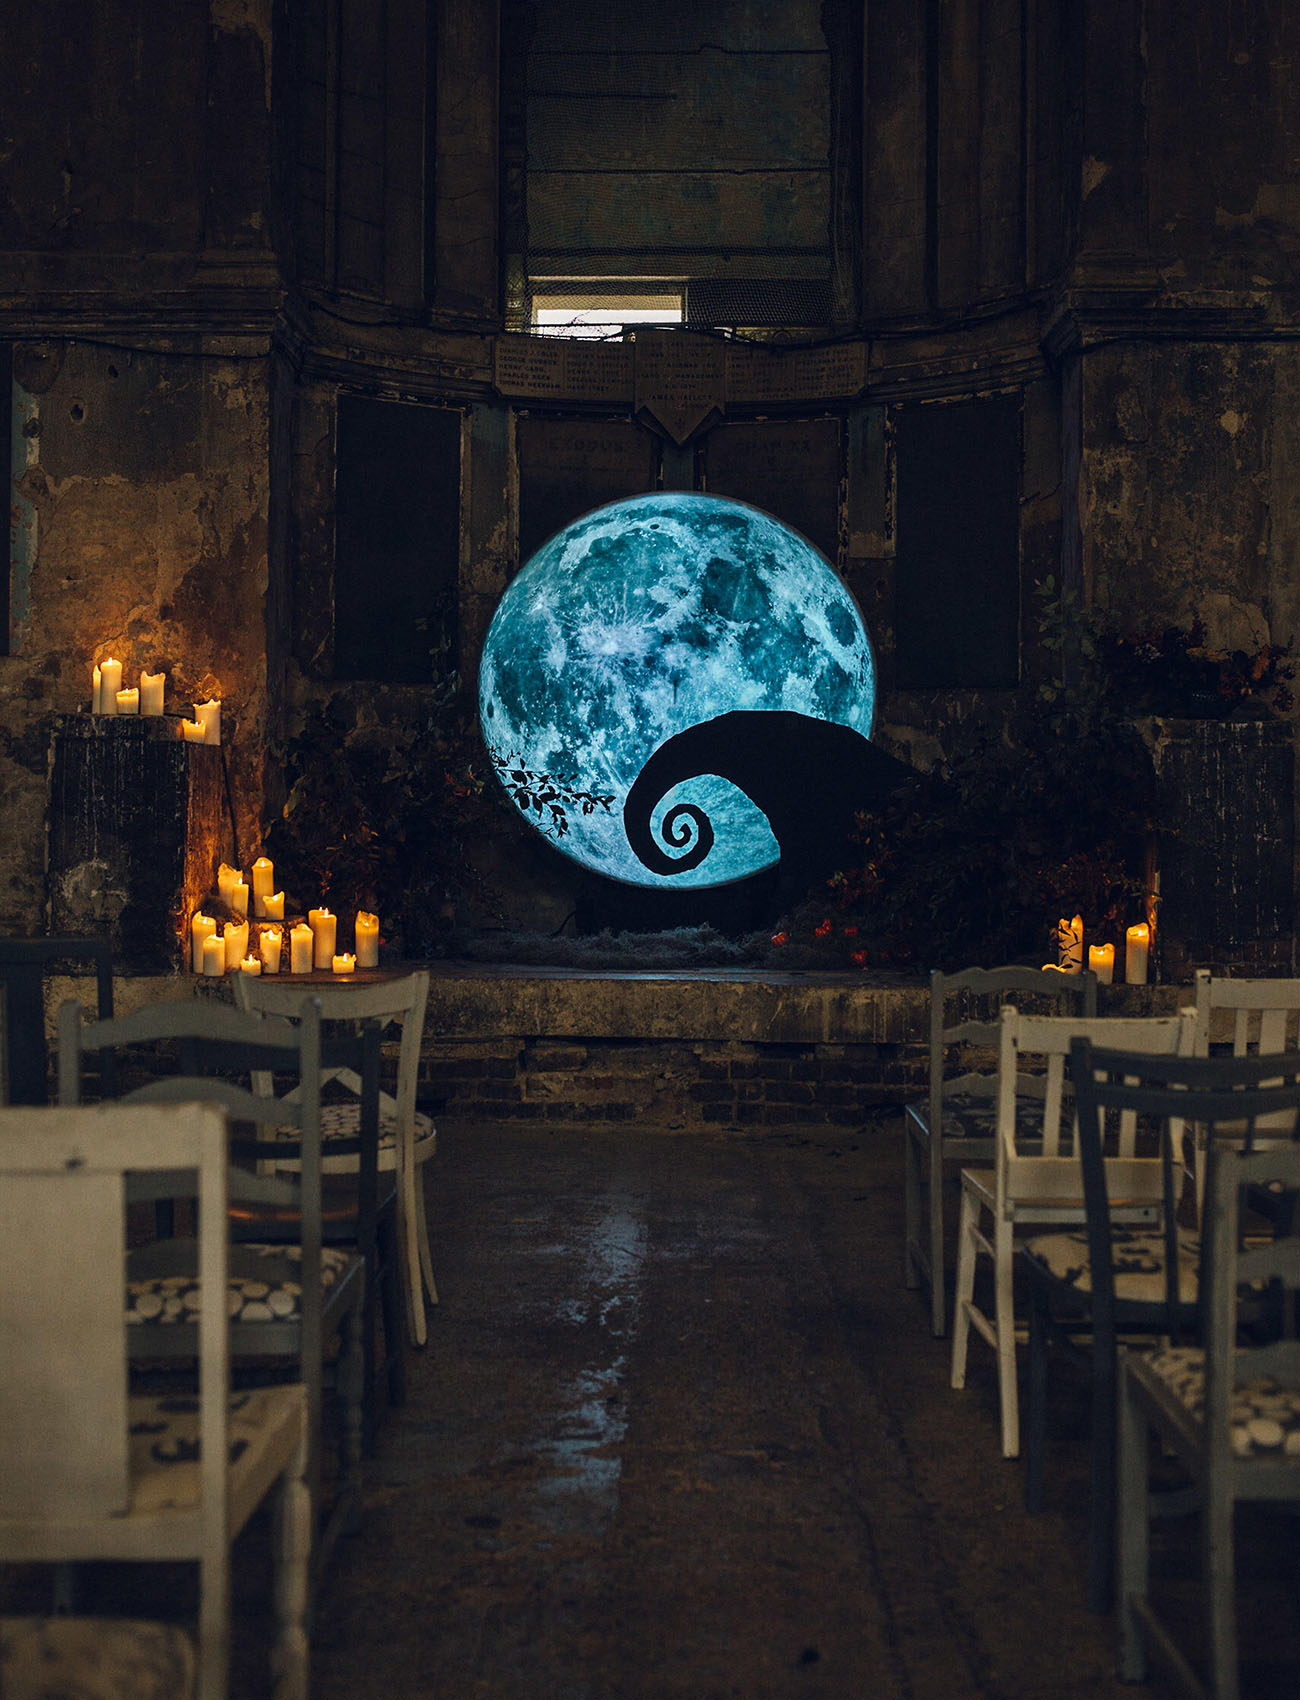 The wedding backdrop was really inspired by the movie, it looks spooky and very styled, and candles around create a mood